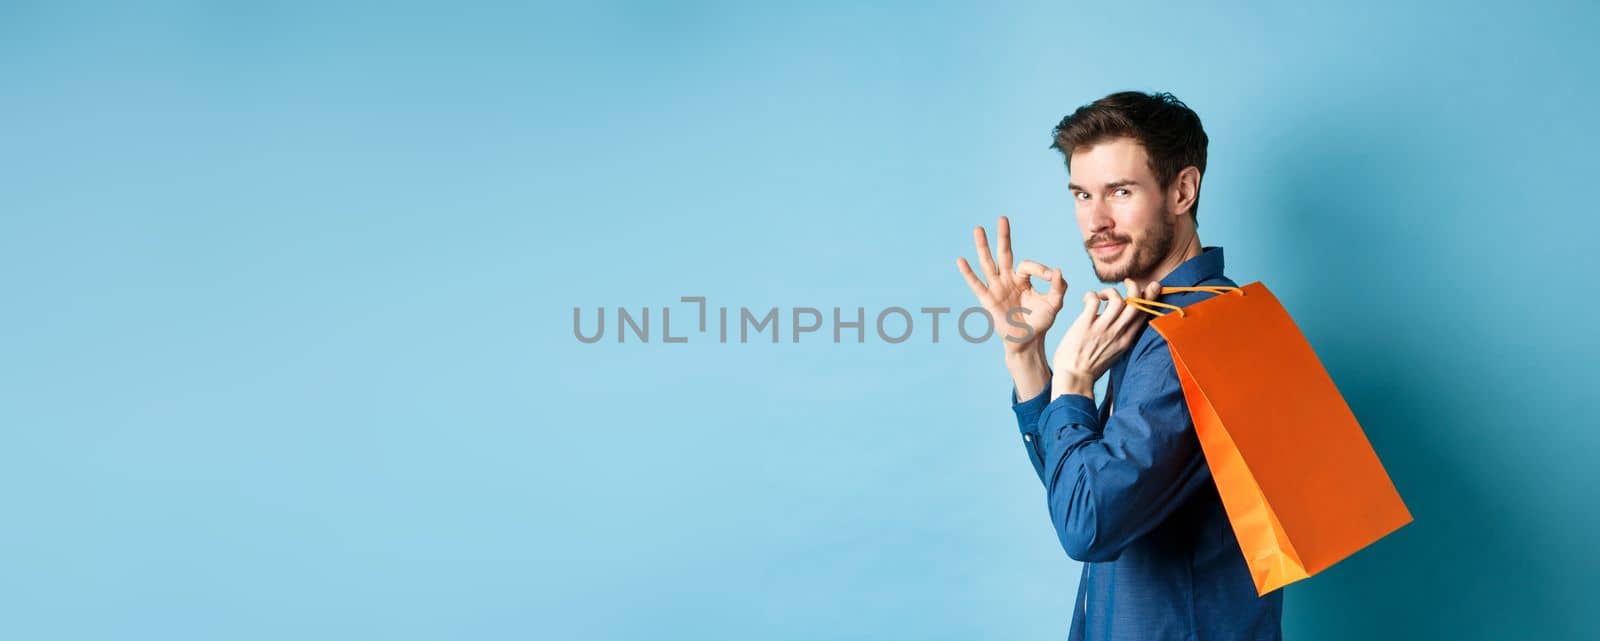 Handsome young man holding shopping bag on shoulder, turn around to look at camera and show okay gesture, recommending shop, blue background.